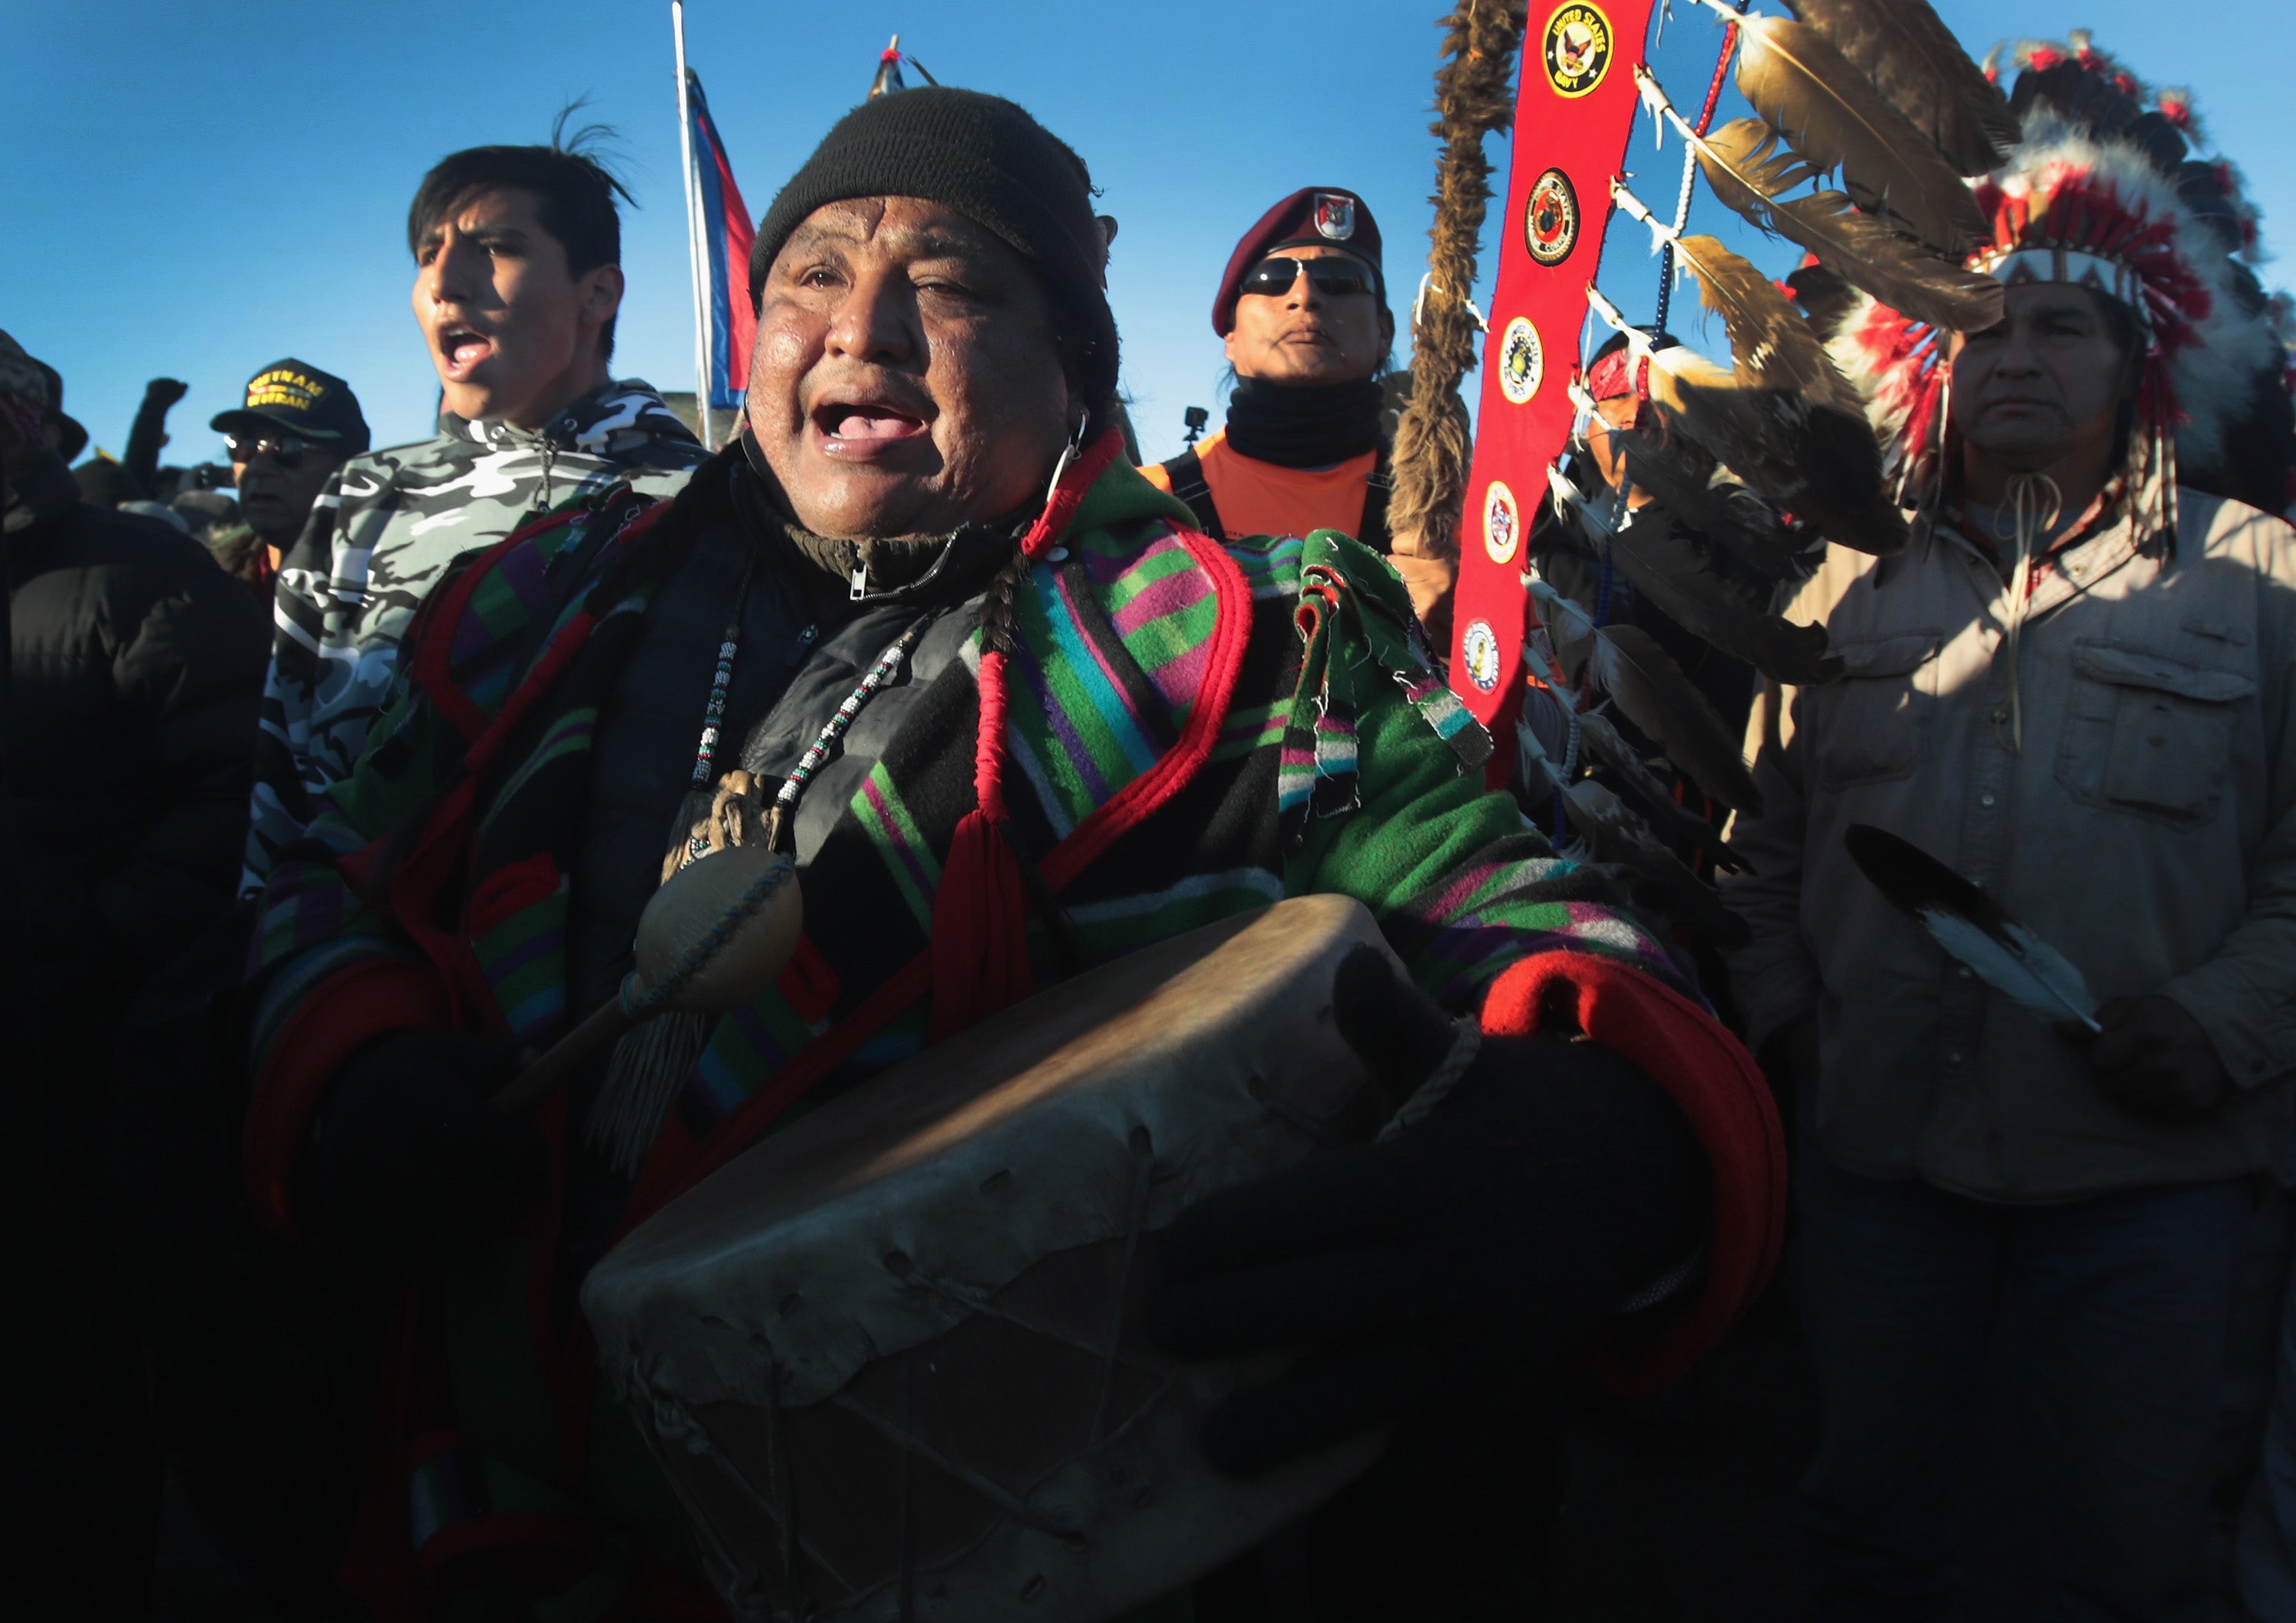 Tribes and allies gathered to defend Standing Rock Sioux territory from the Dakota Access Pipeline in 2016. A federal judge struck down the pipeline's permits on March 25, 2020, after years of litigation.Tribes and allies gathered to defend Standing Rock 